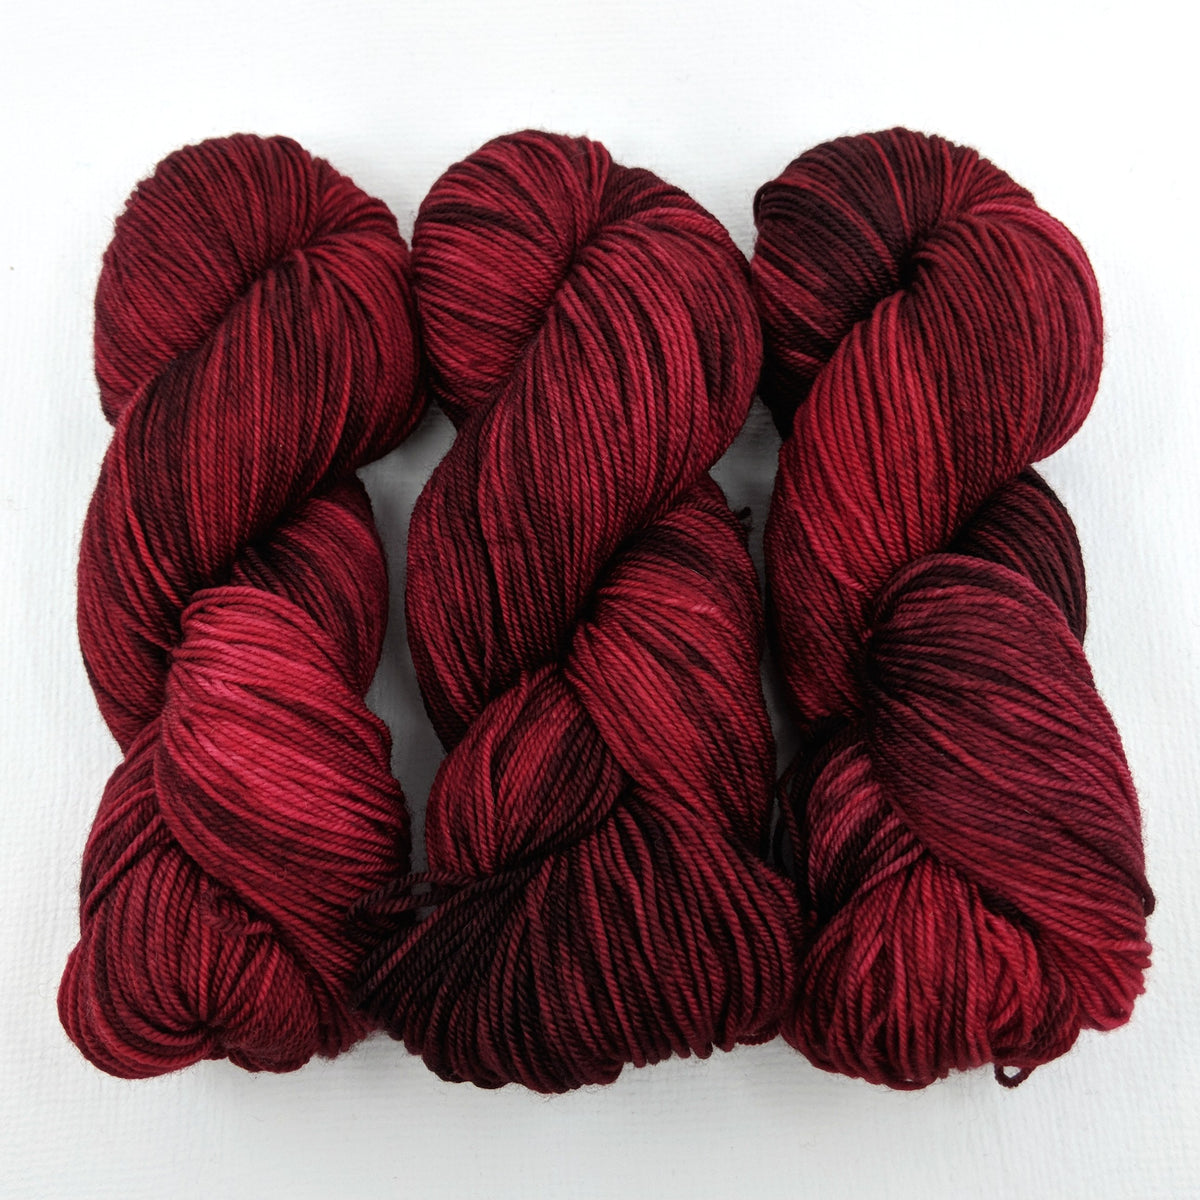 Syrah by Moonlight - Passion 8 Fingering - Dyed Stock